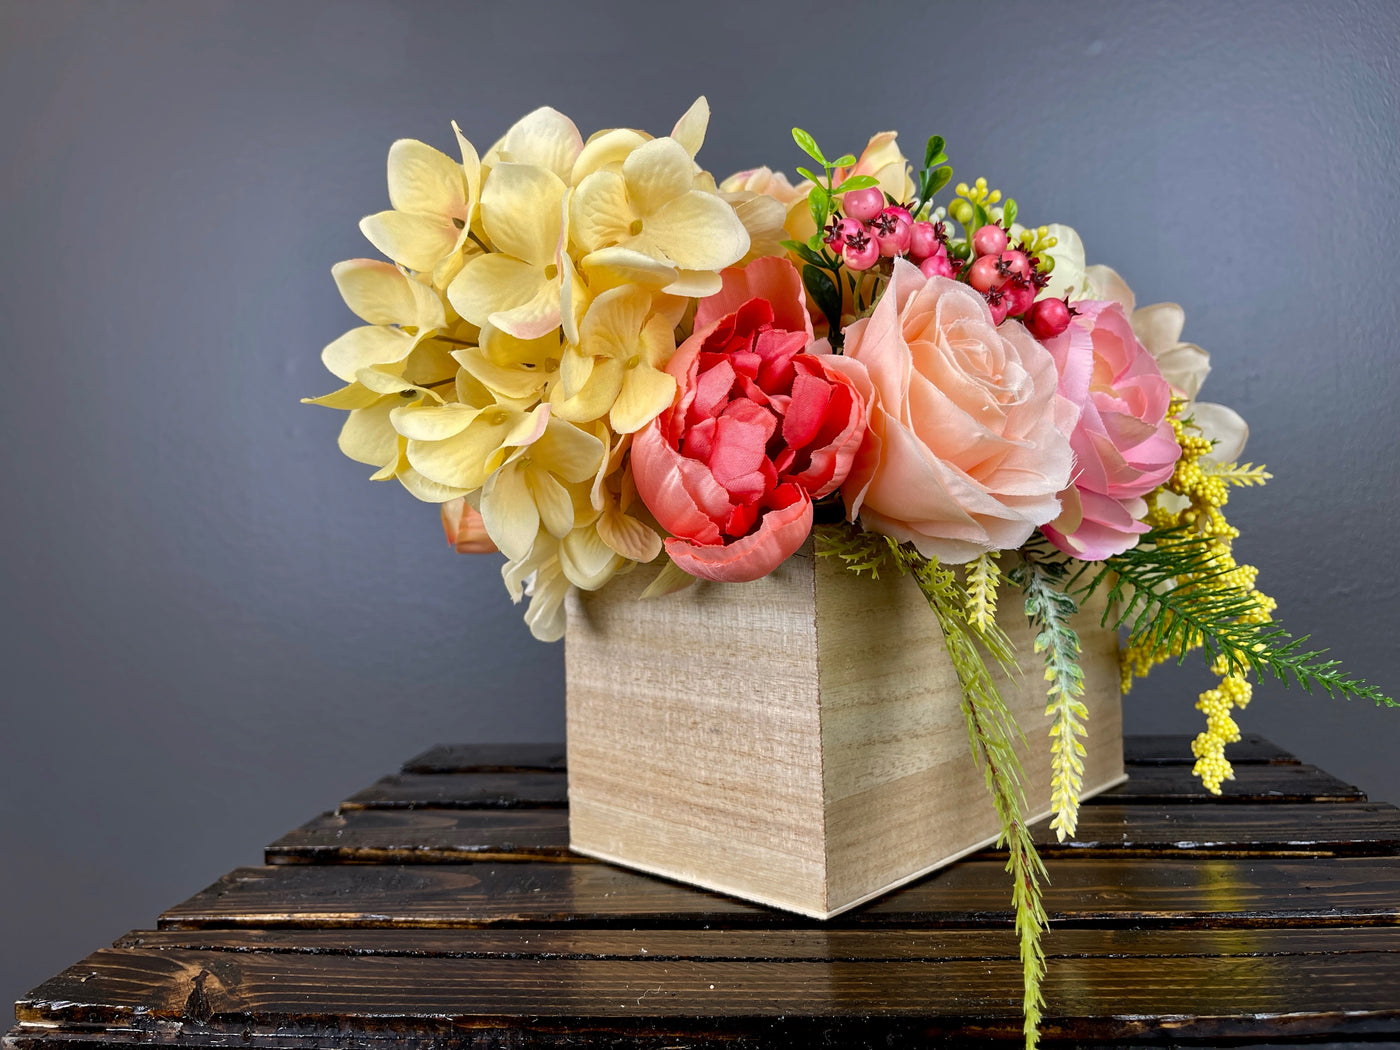 Invite the colorful array of a summer sunset  inside with this bright centrepiece. Large pink and yellow peony blossoms open gracefully next to custard hydrangeas, peach English roses, white globe dahlia, kicky craspedia, and yellow hypericum berries cascading alongside bright green fern. Placed in a lacquered pine box (L8”x W4”x H4”).